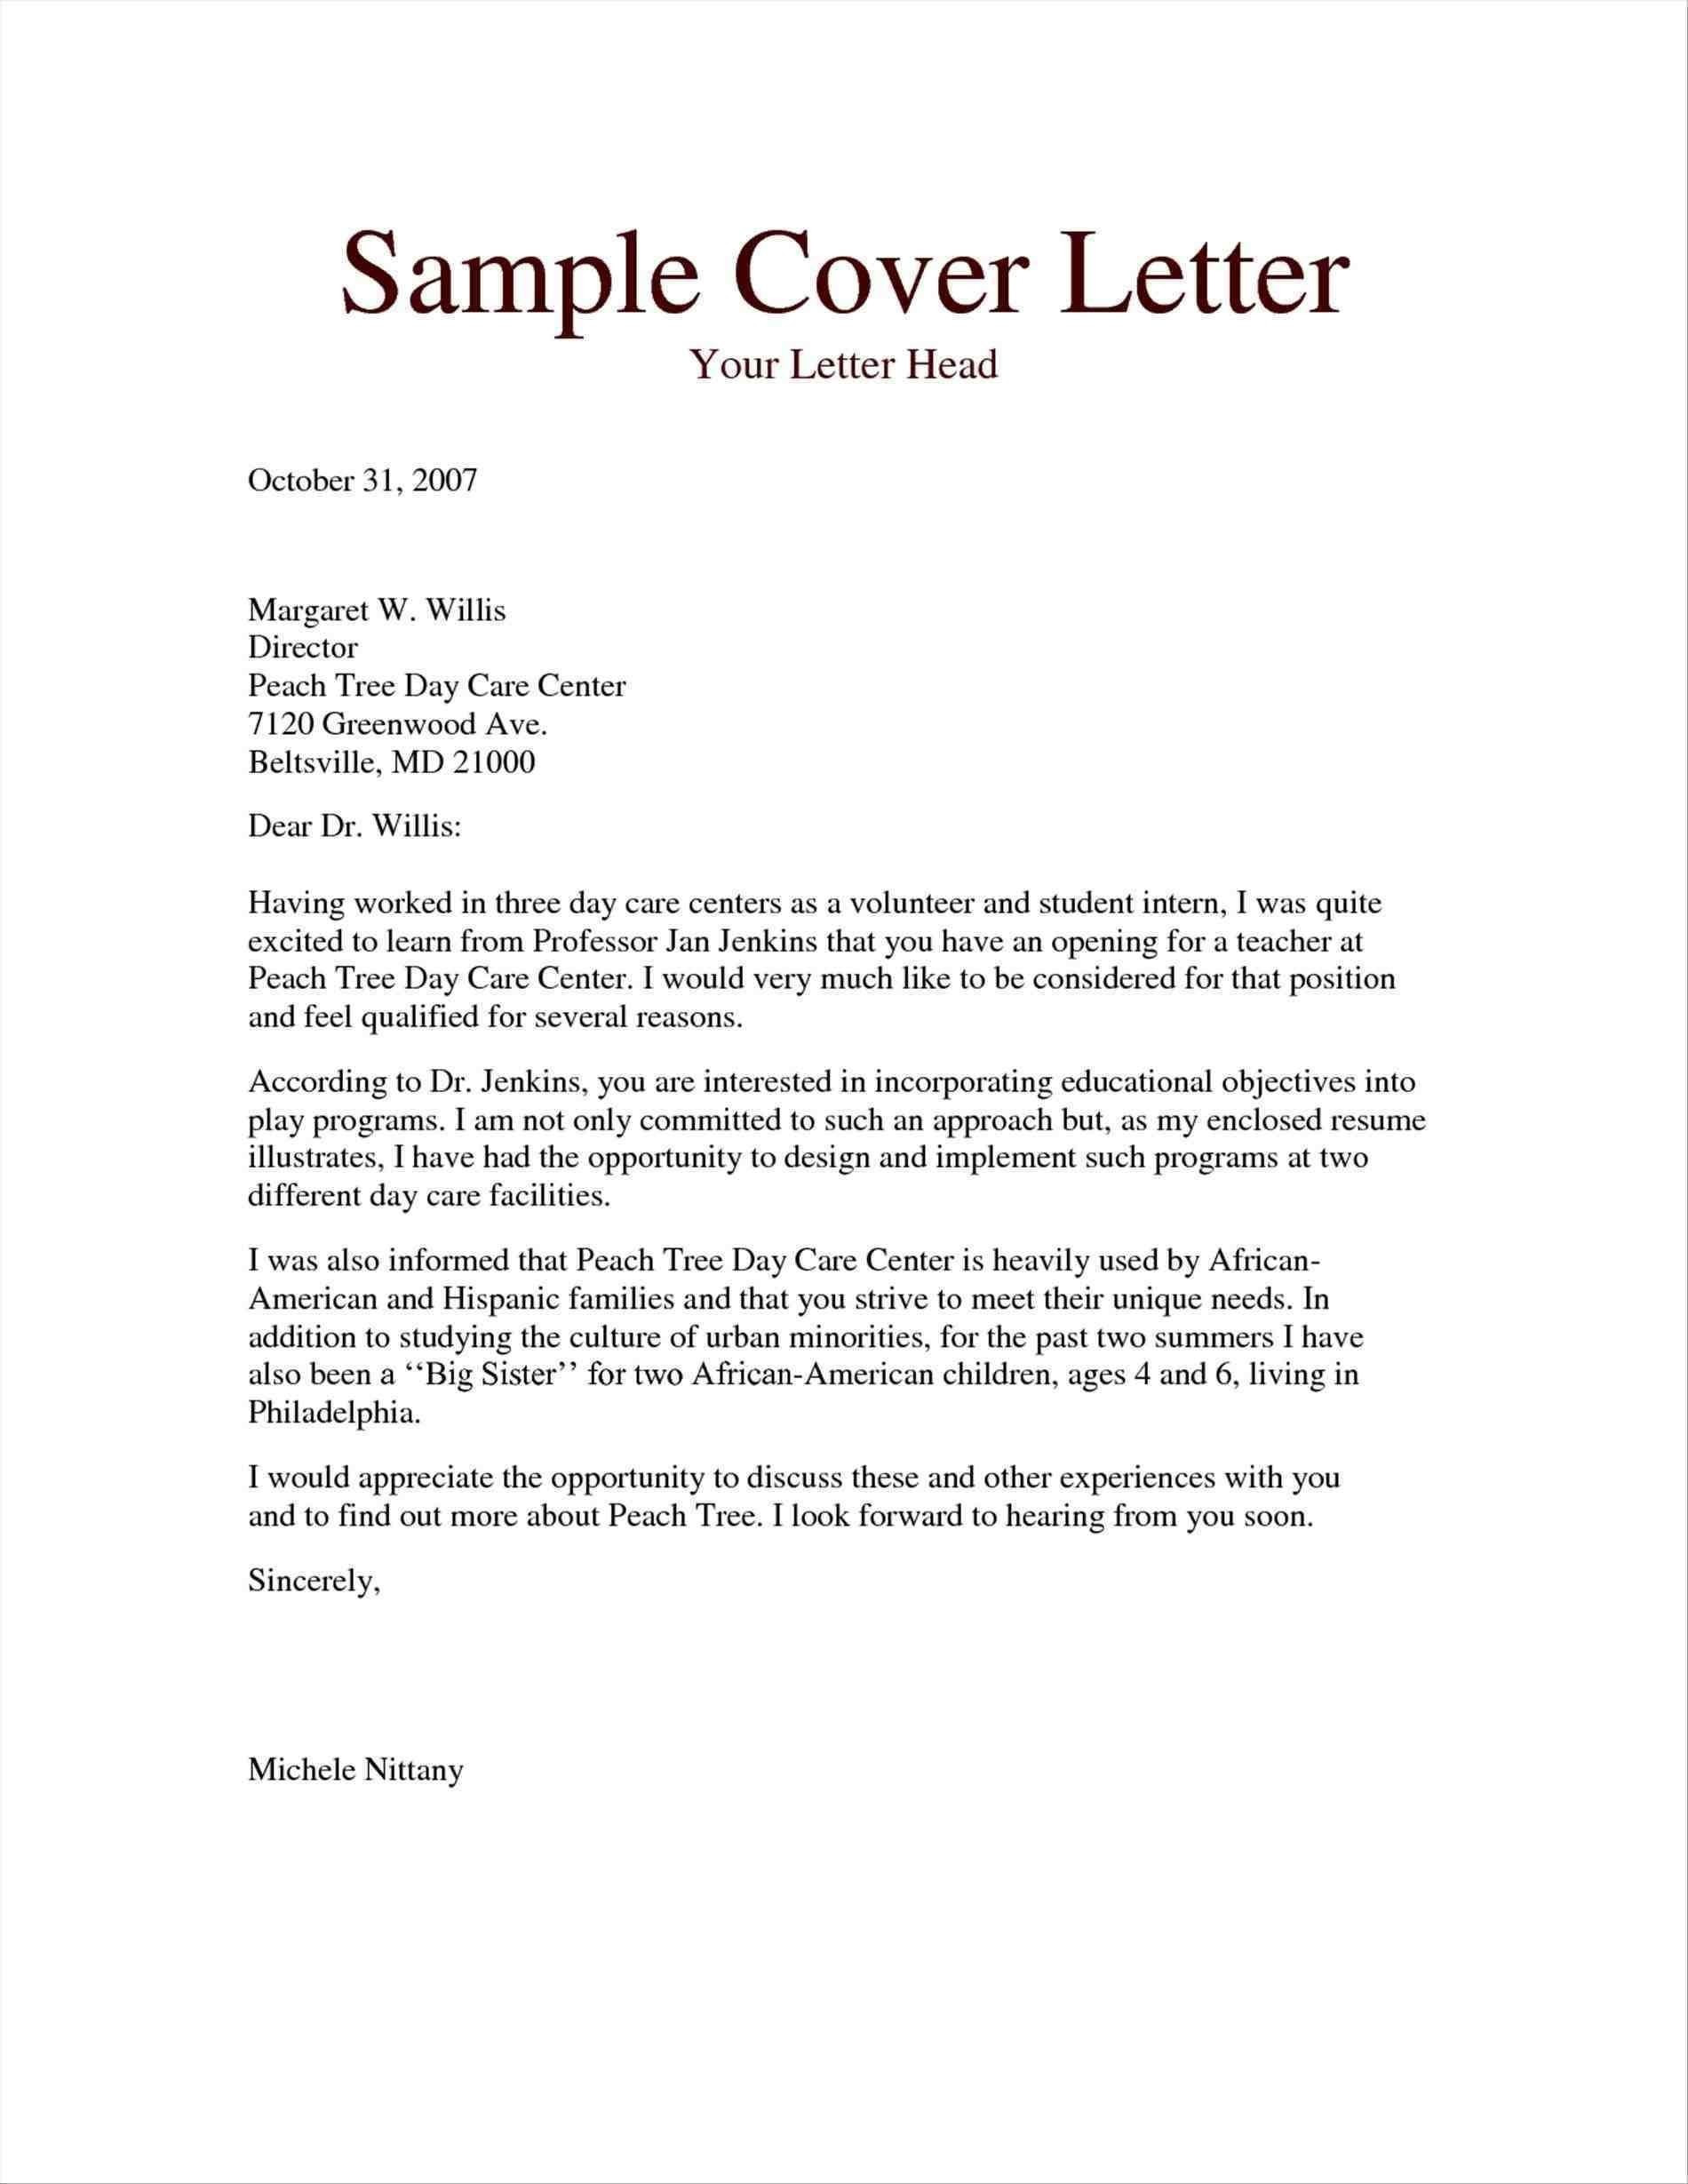 sample cover letter no experience but willing to learn